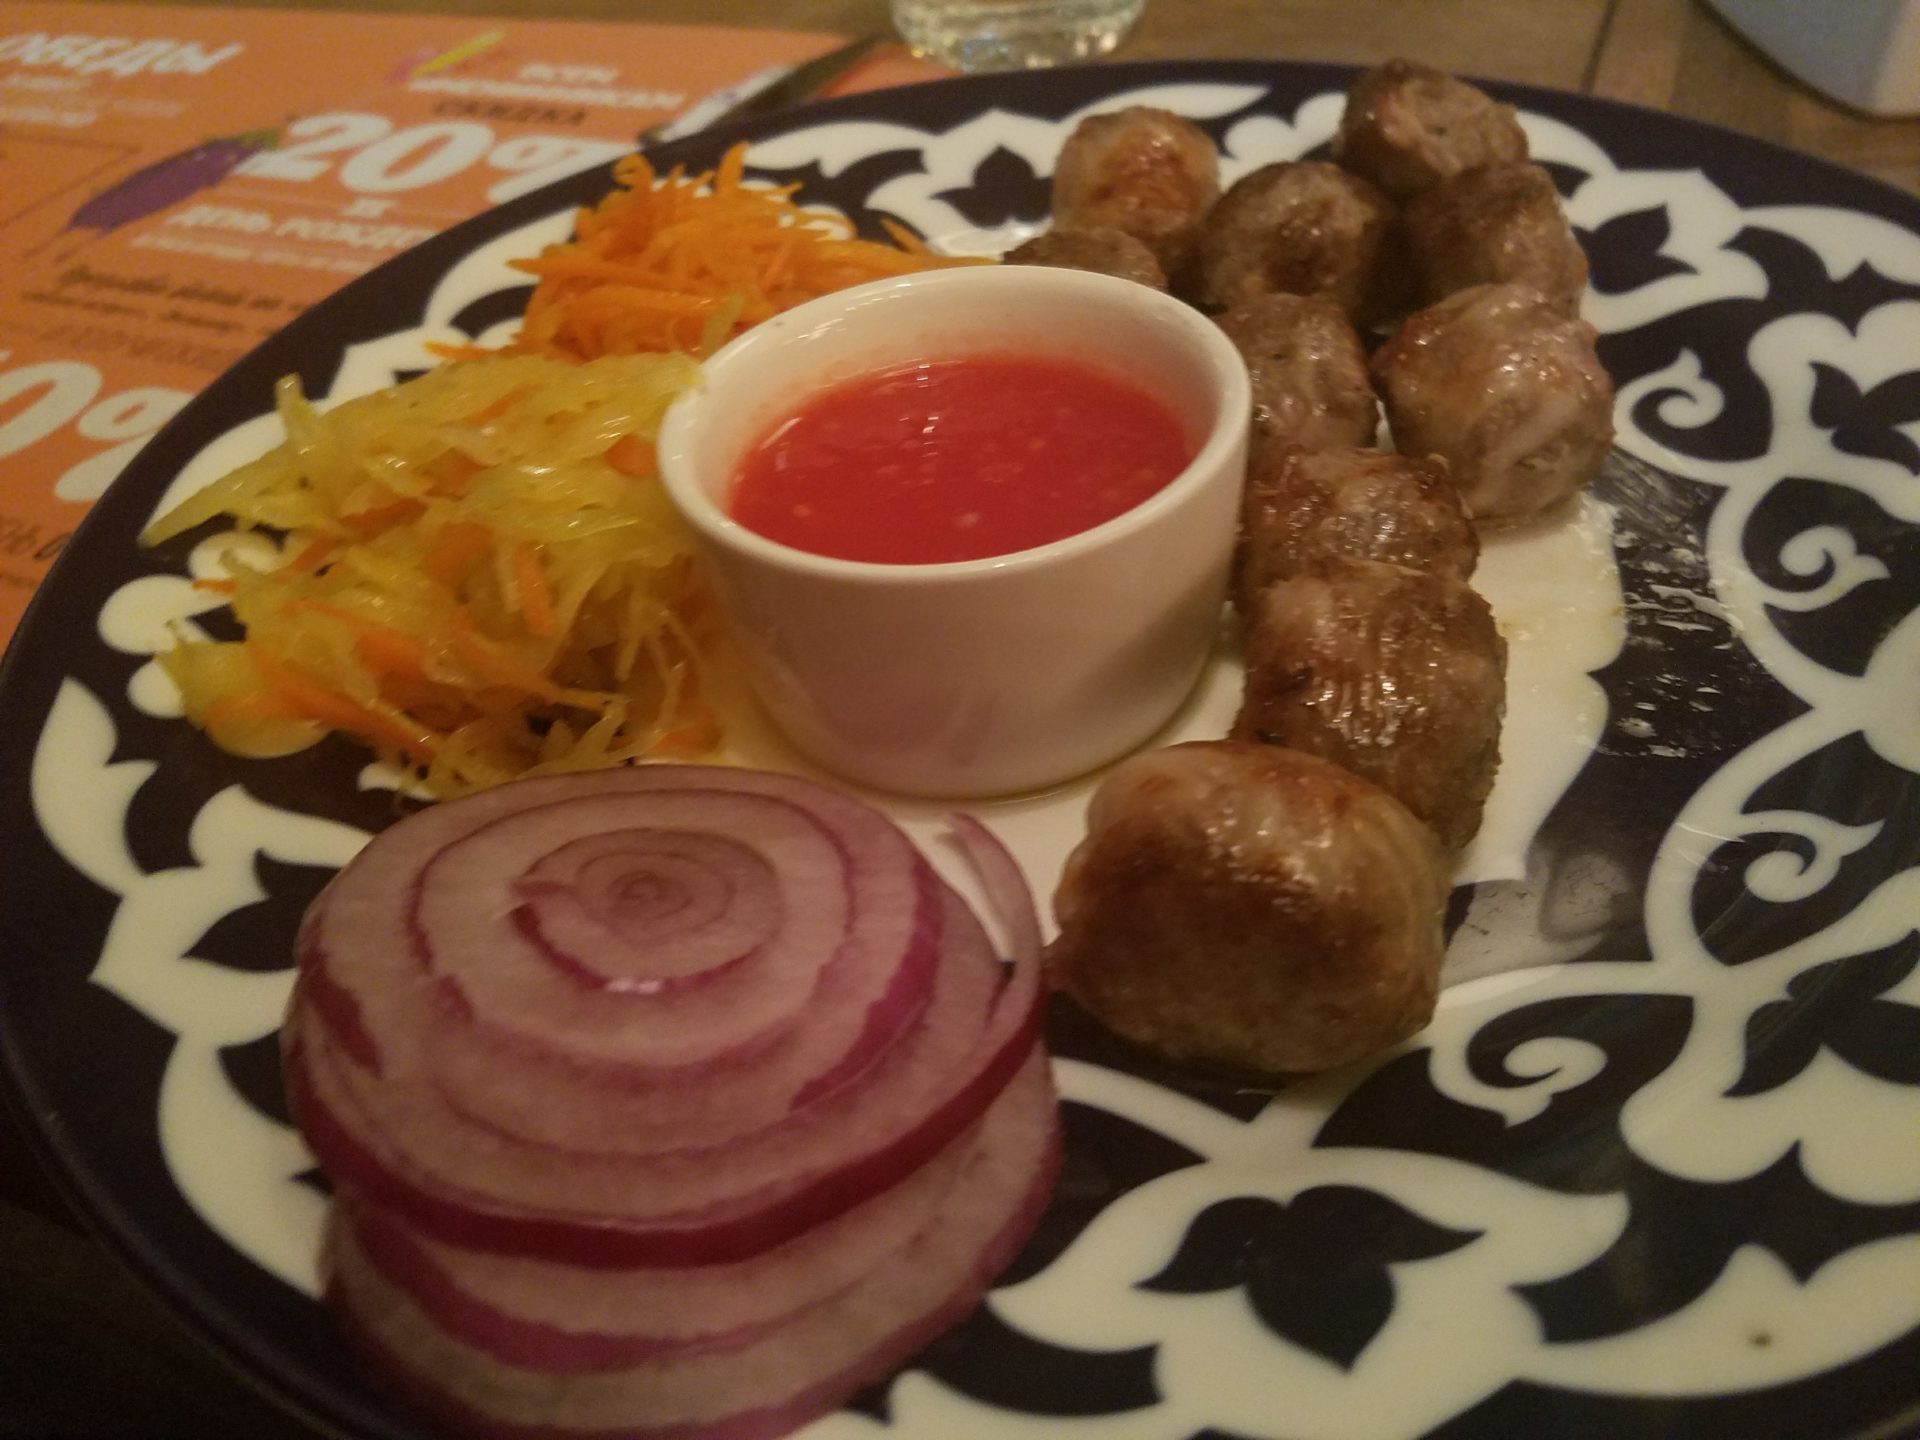 a plate of meatballs and vegetables